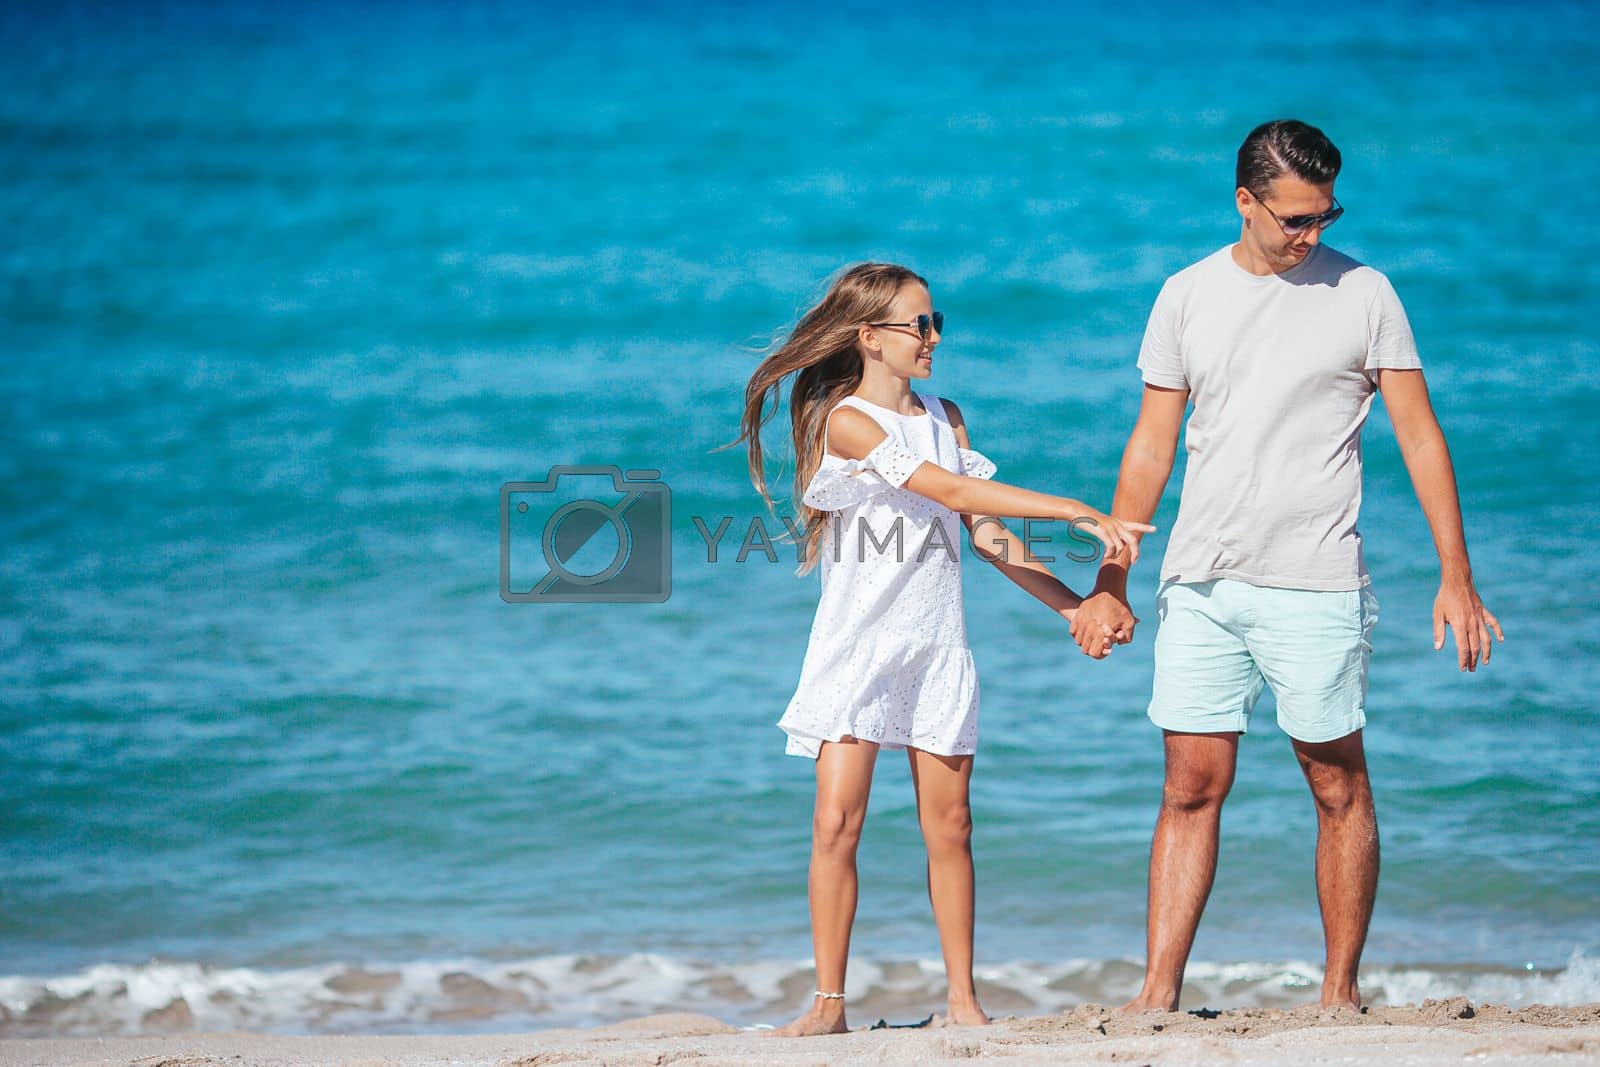 Royalty free image of Family of dad and daughter have fun together on the beach. Family vacation by travnikovstudio